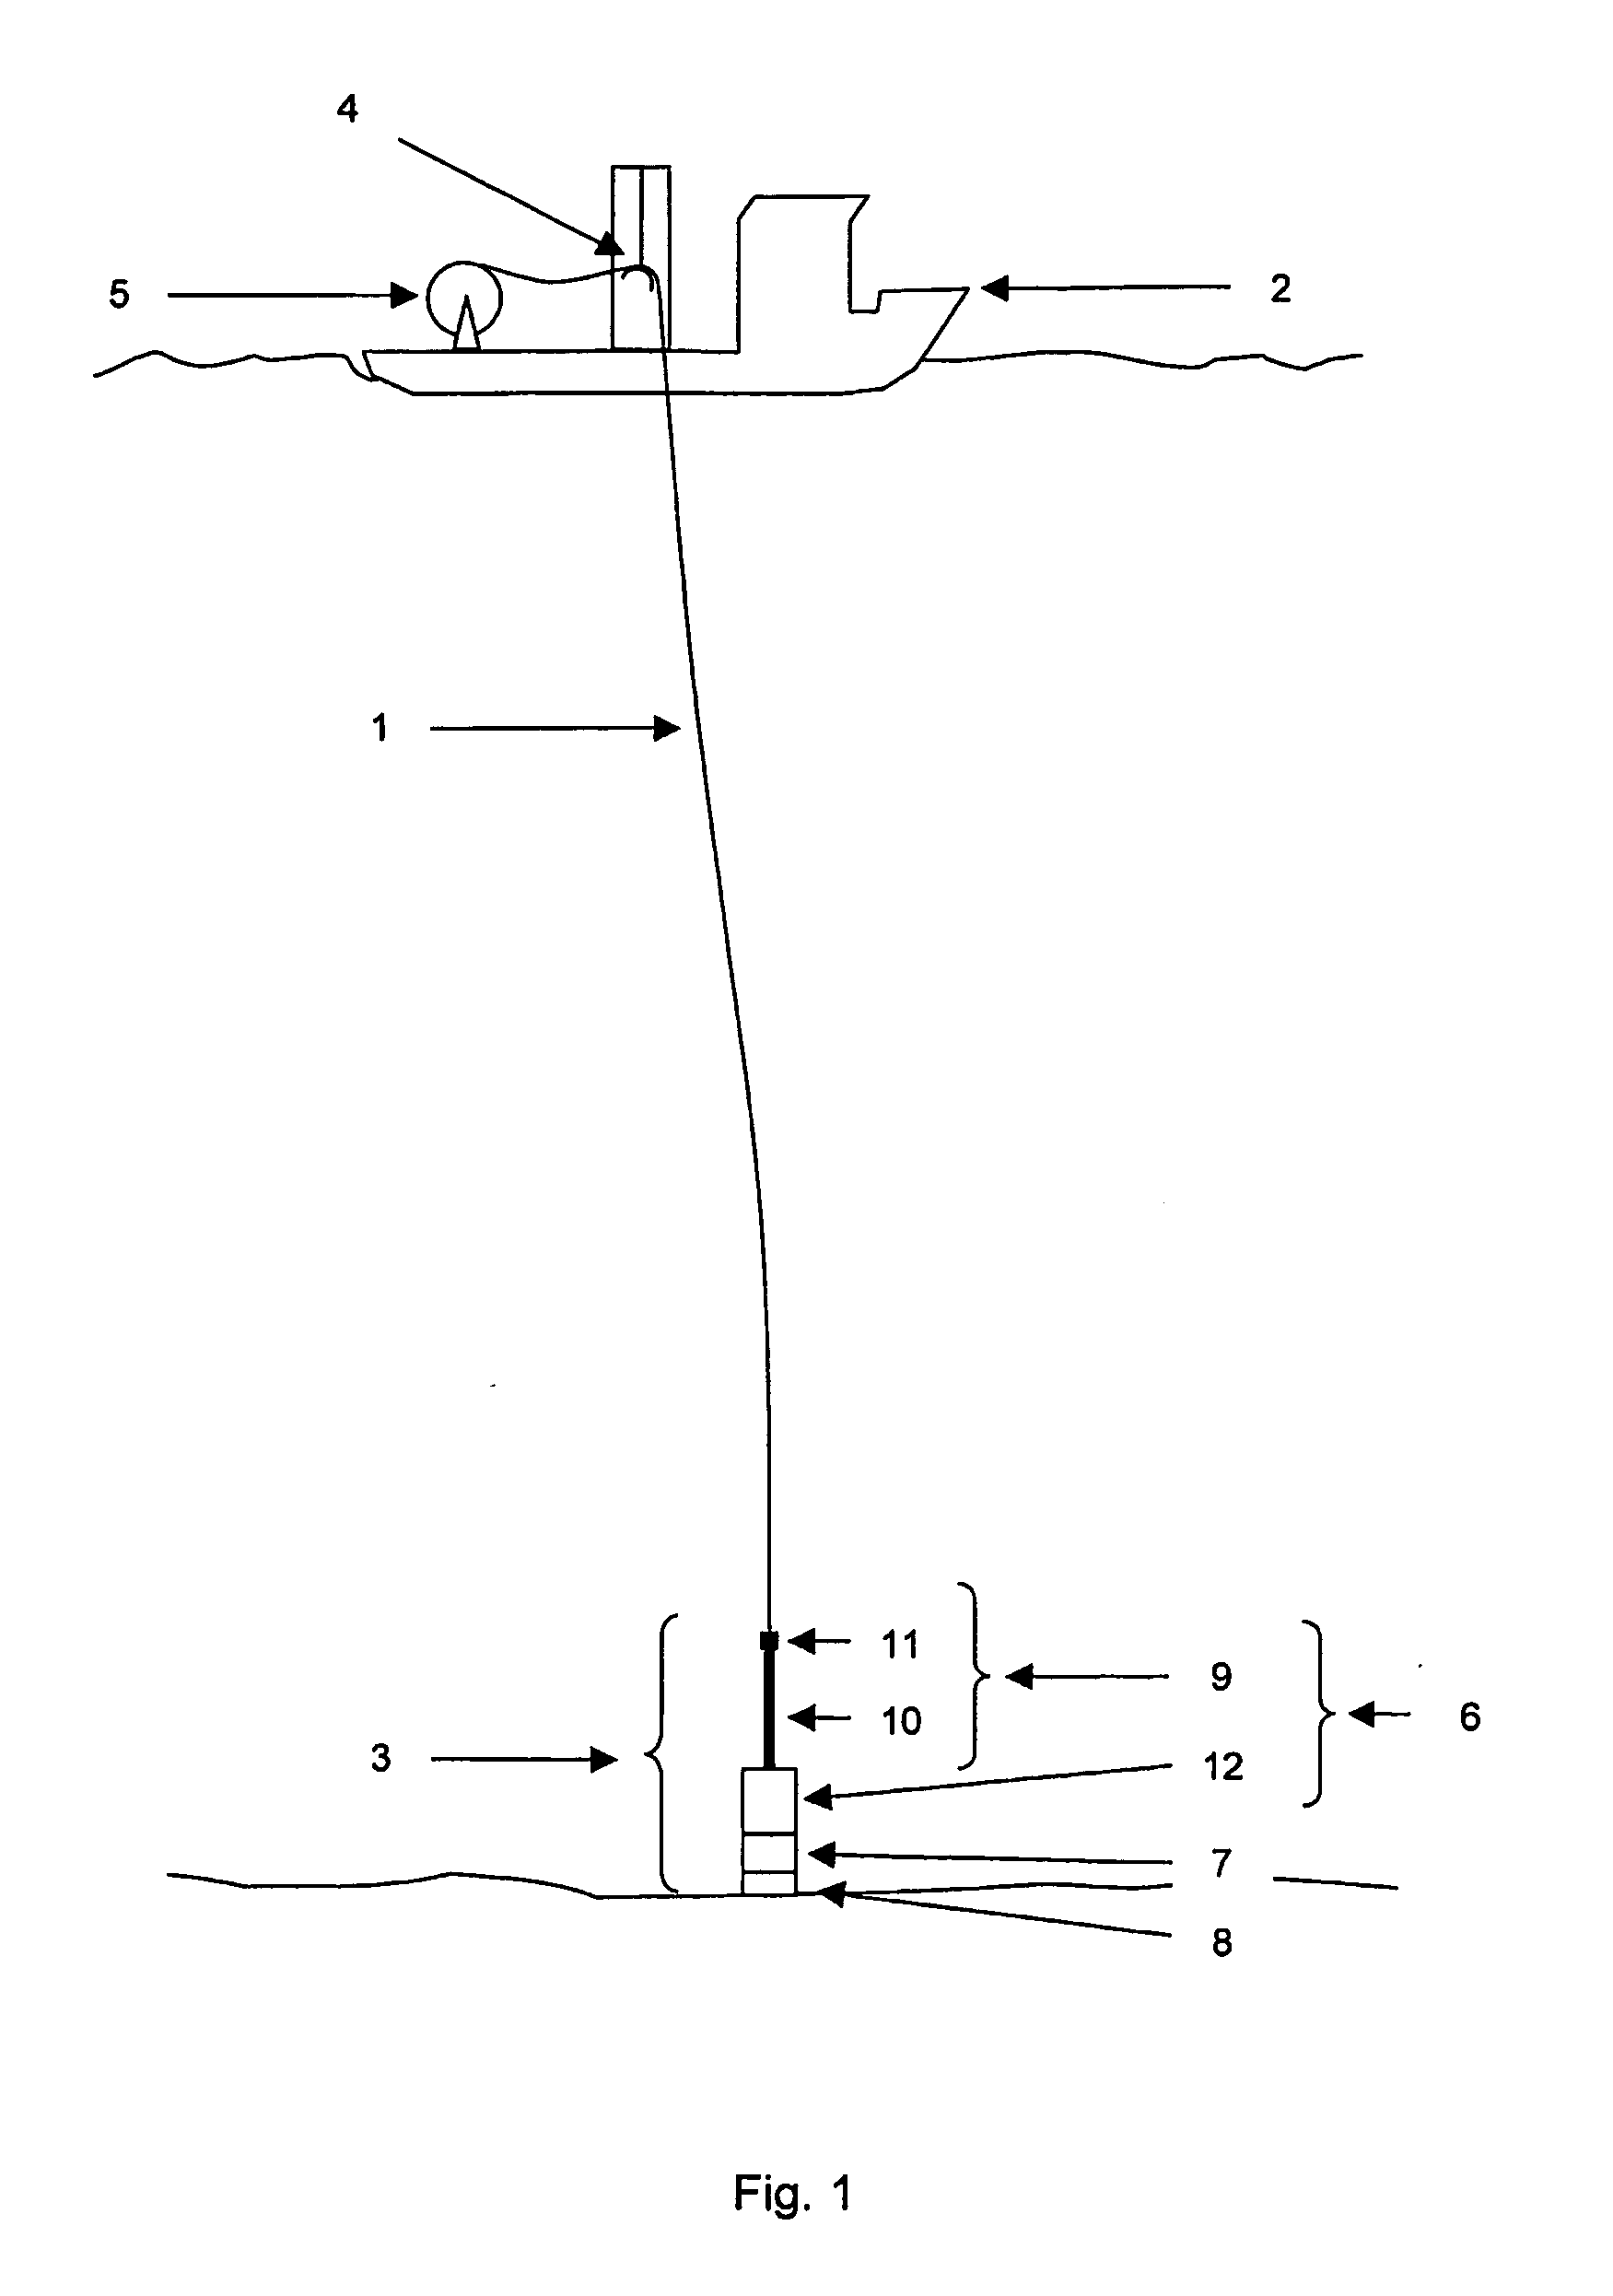 Method and a device for monitoring an/or controlling a load on a tensioned elongated element